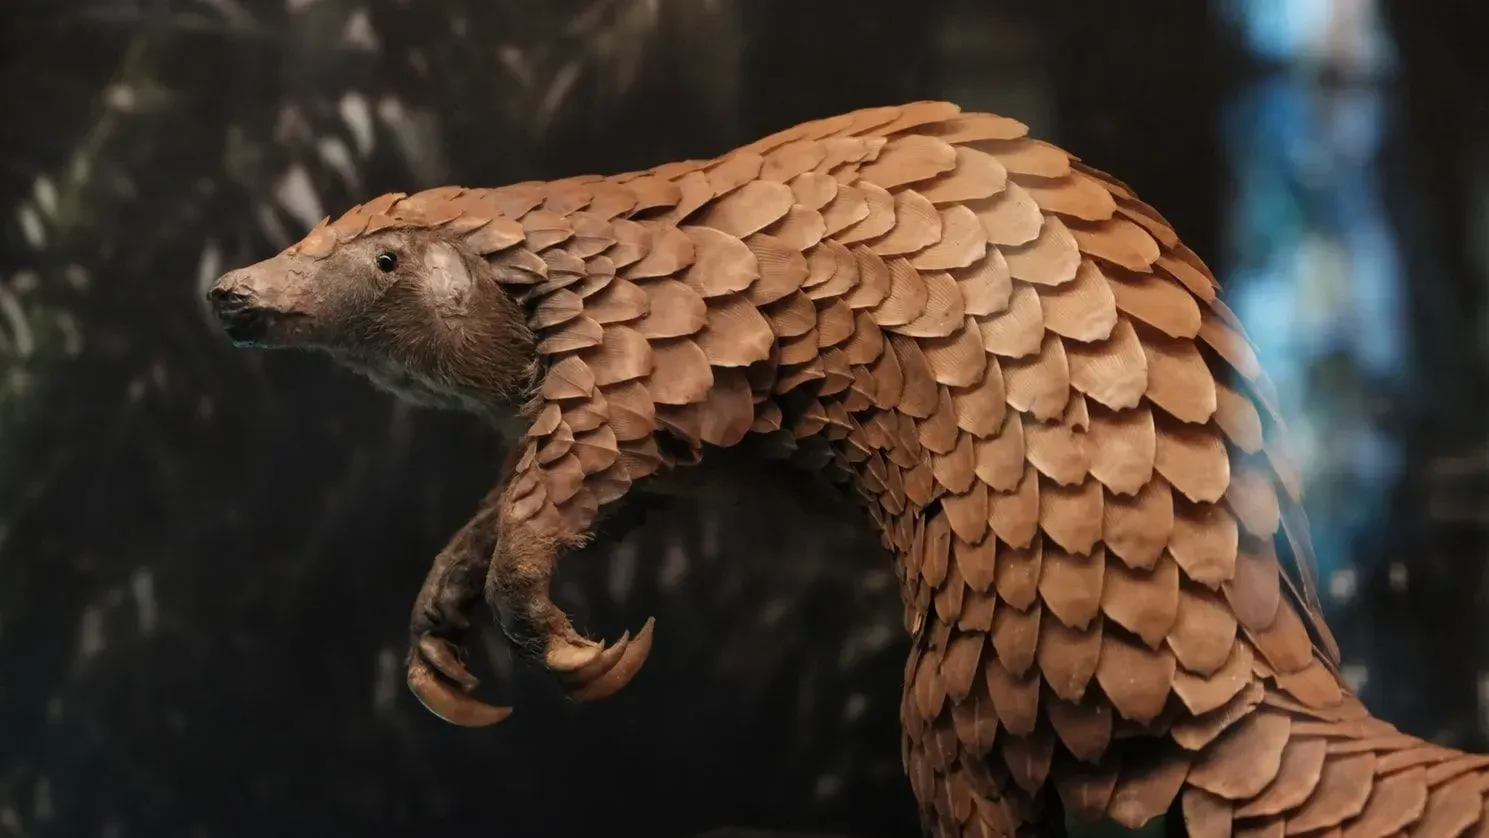 Pangolin is a scaly animal whose might soon become an Endangered species.